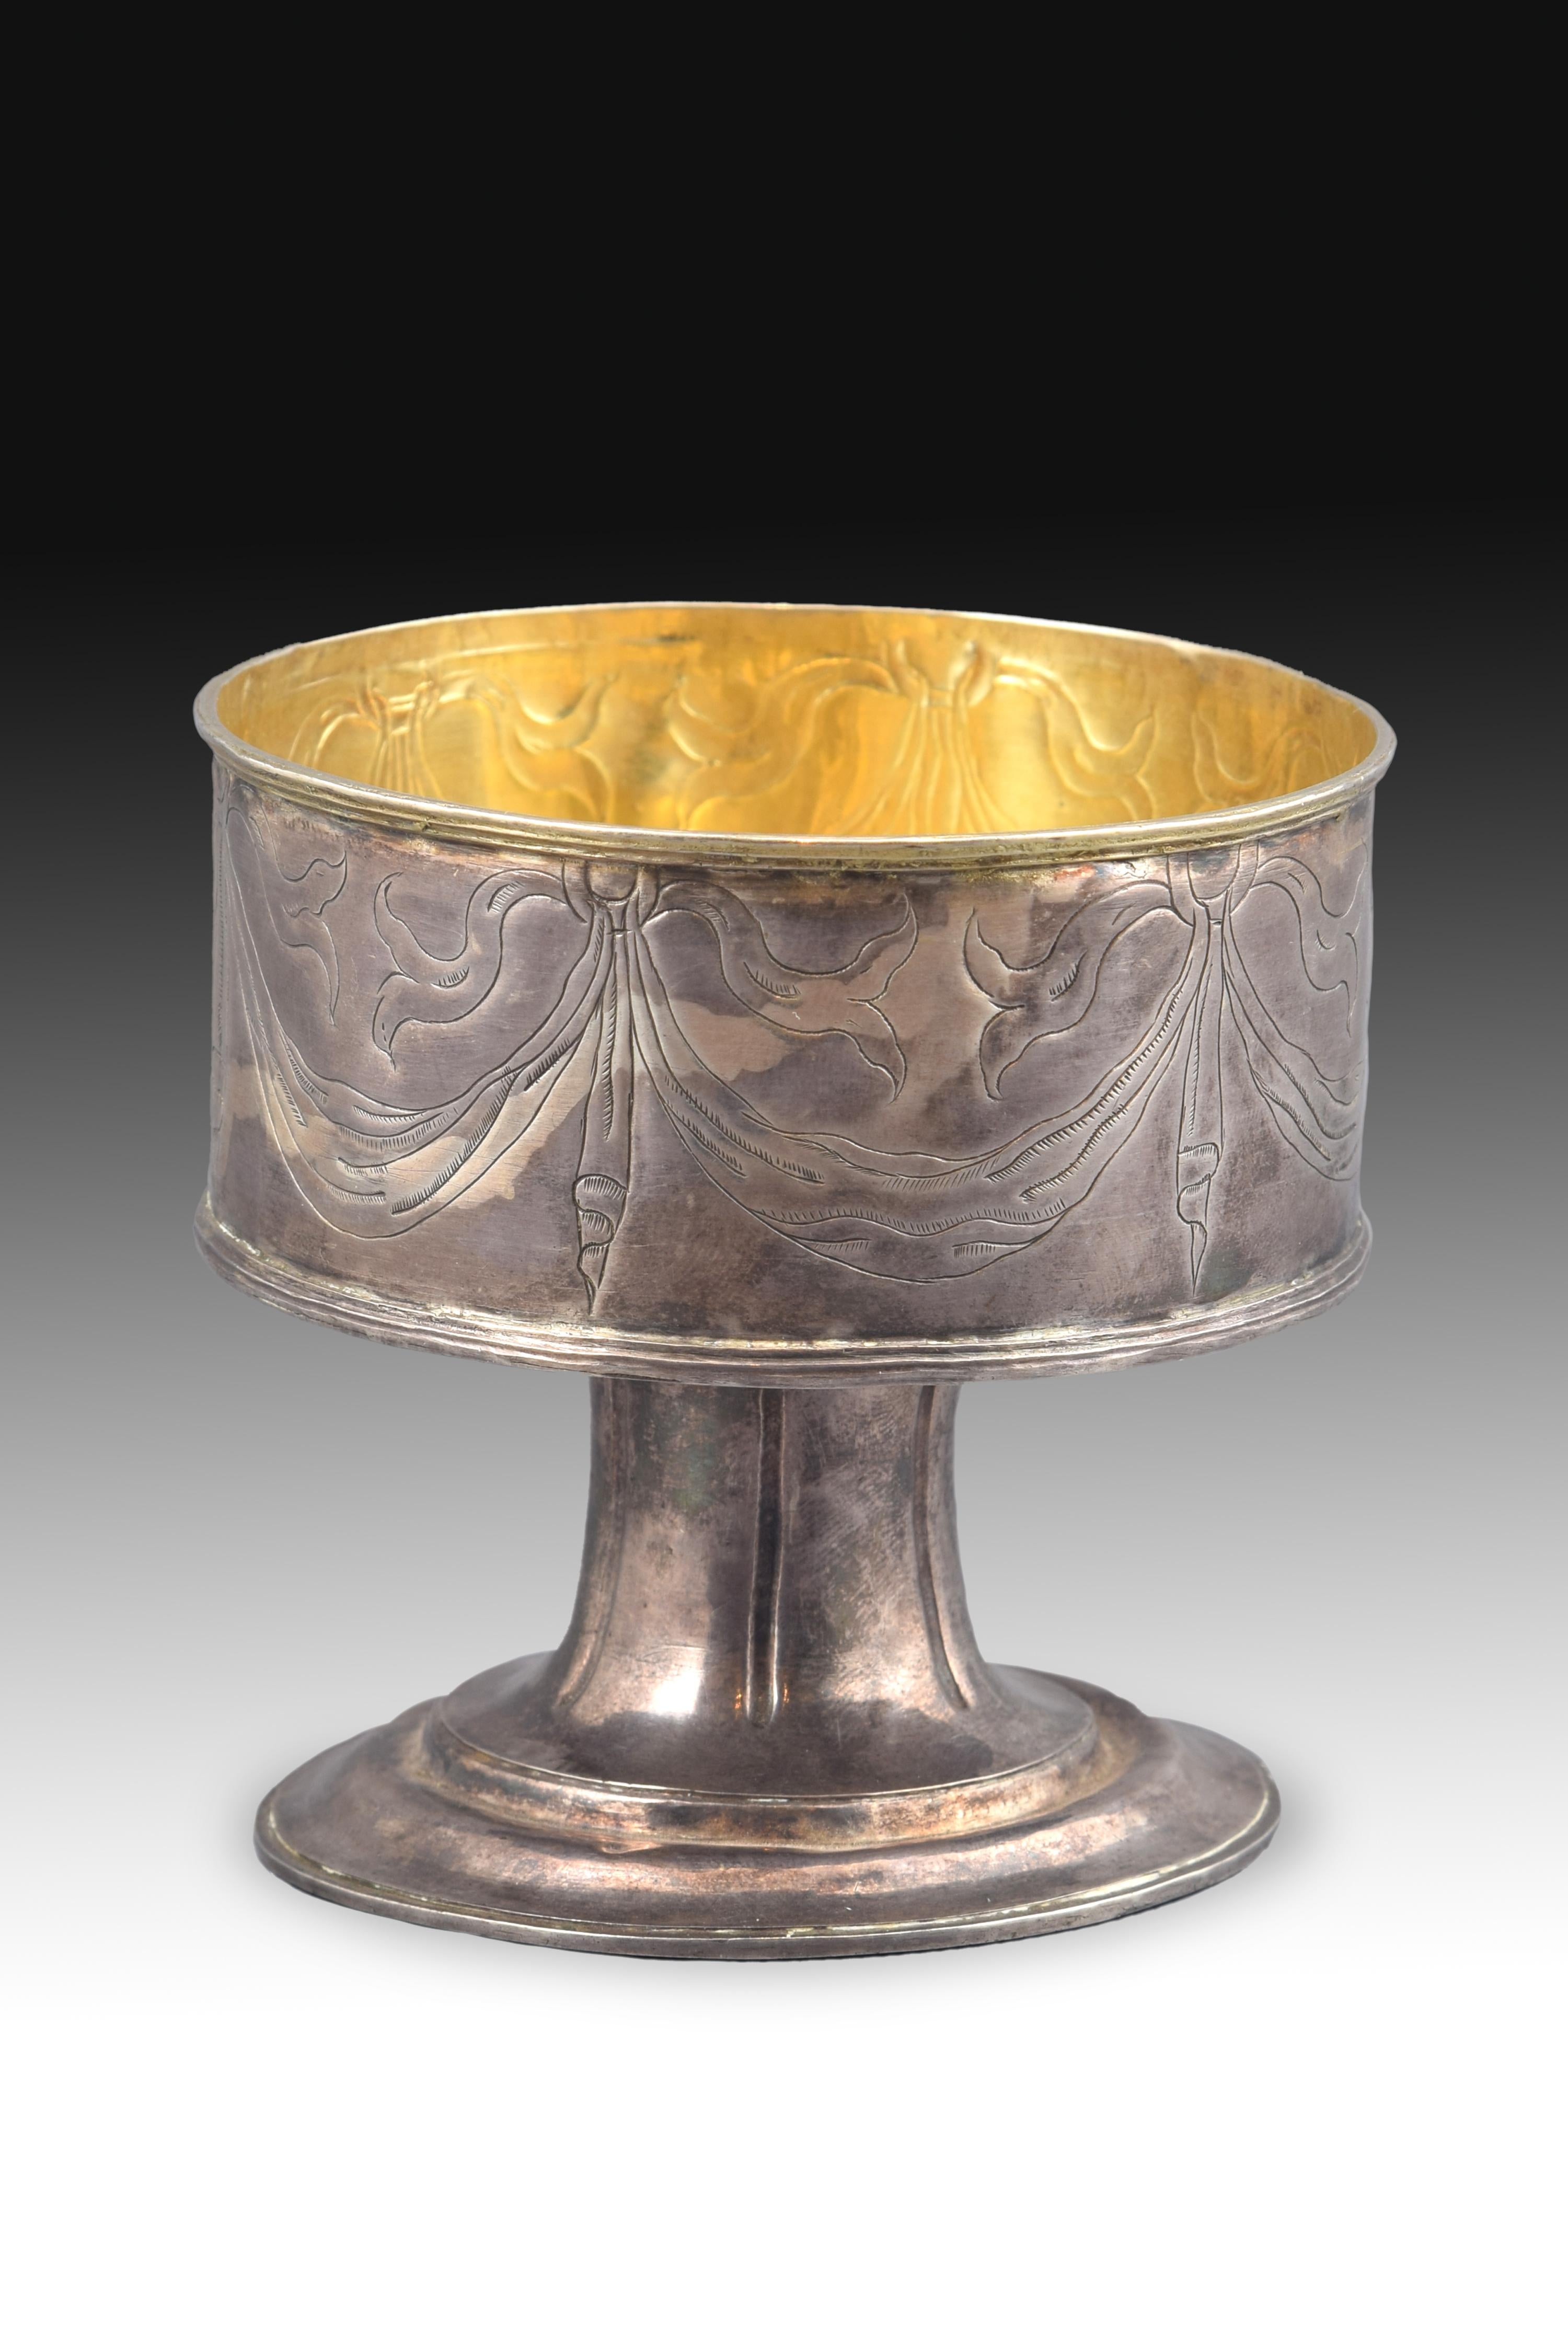 Piece made in silver (with the interior gilded) that shows a circular base elevated in two levels by smooth moldings and a grooved foot that leads into the container area, which is decorated on the outside with ribbons that hang from rings (this